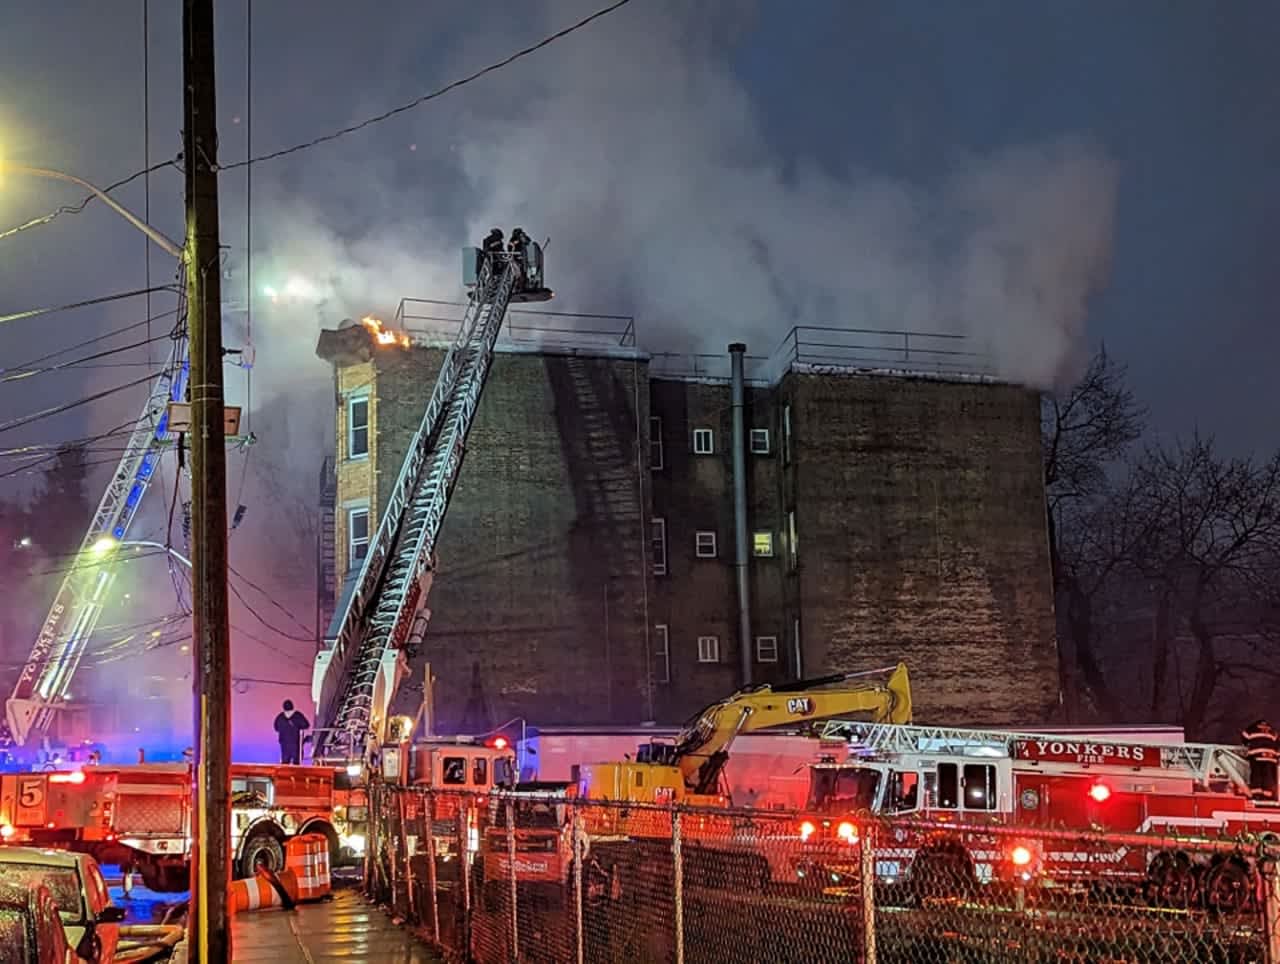 The fire started at an apartment building in Yonkers on Mulberry Street.